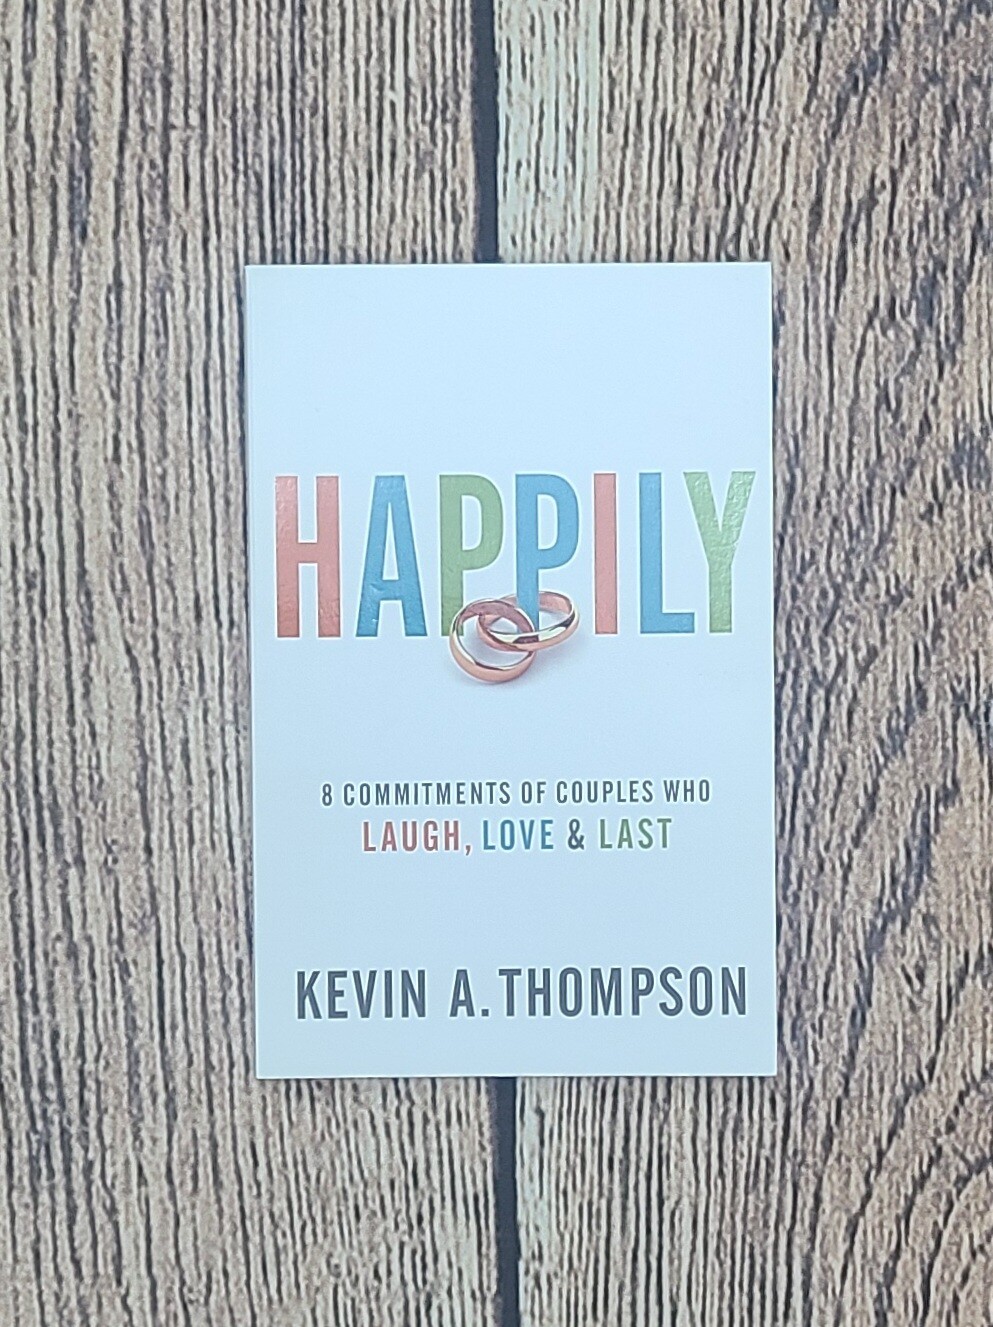 Happily: 8 Commitments of Couples Who Laugh, Love, and Last by Kevin A. Thompson